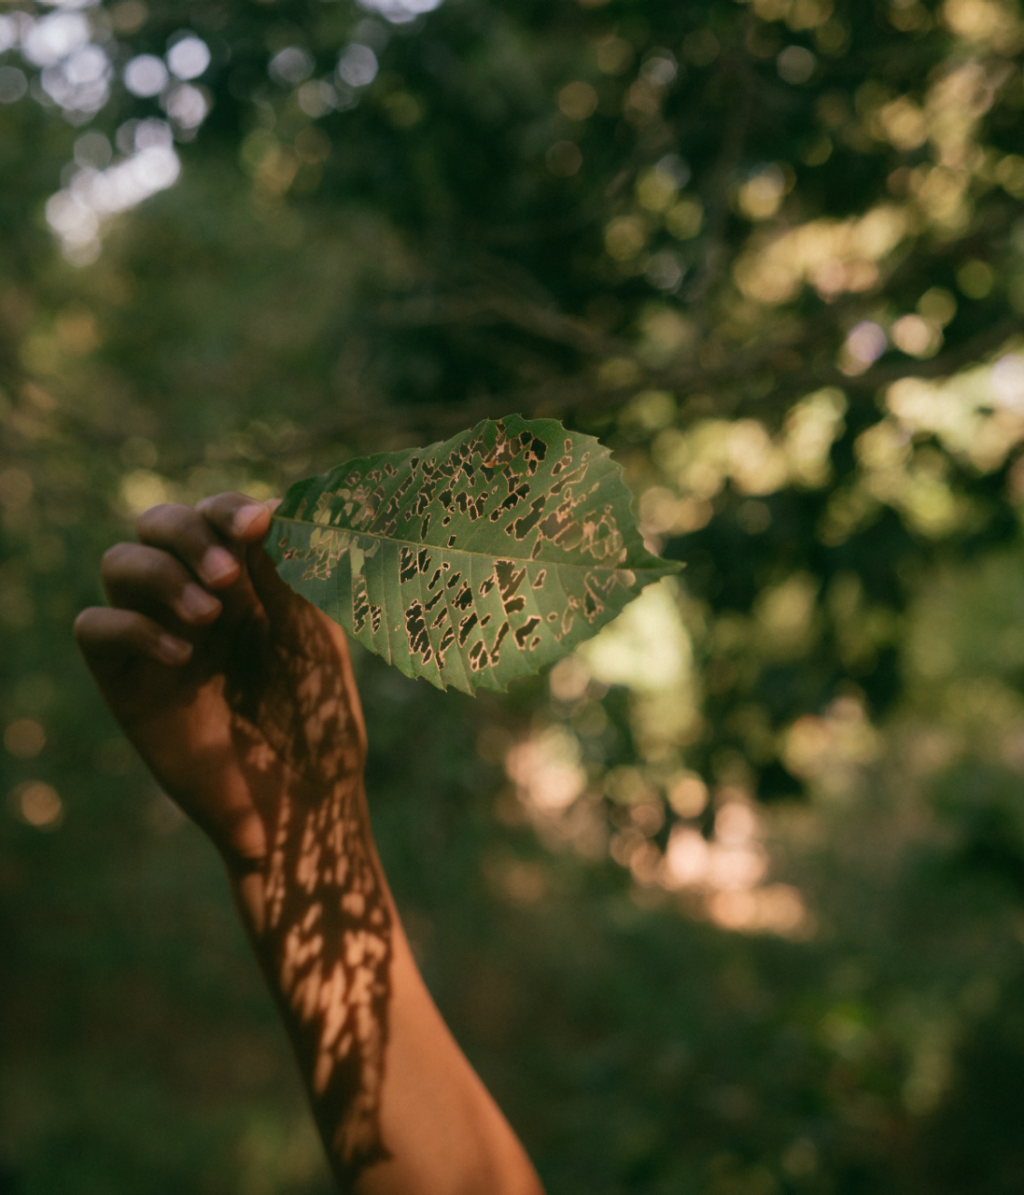 A hand holding a leaf in the foreground